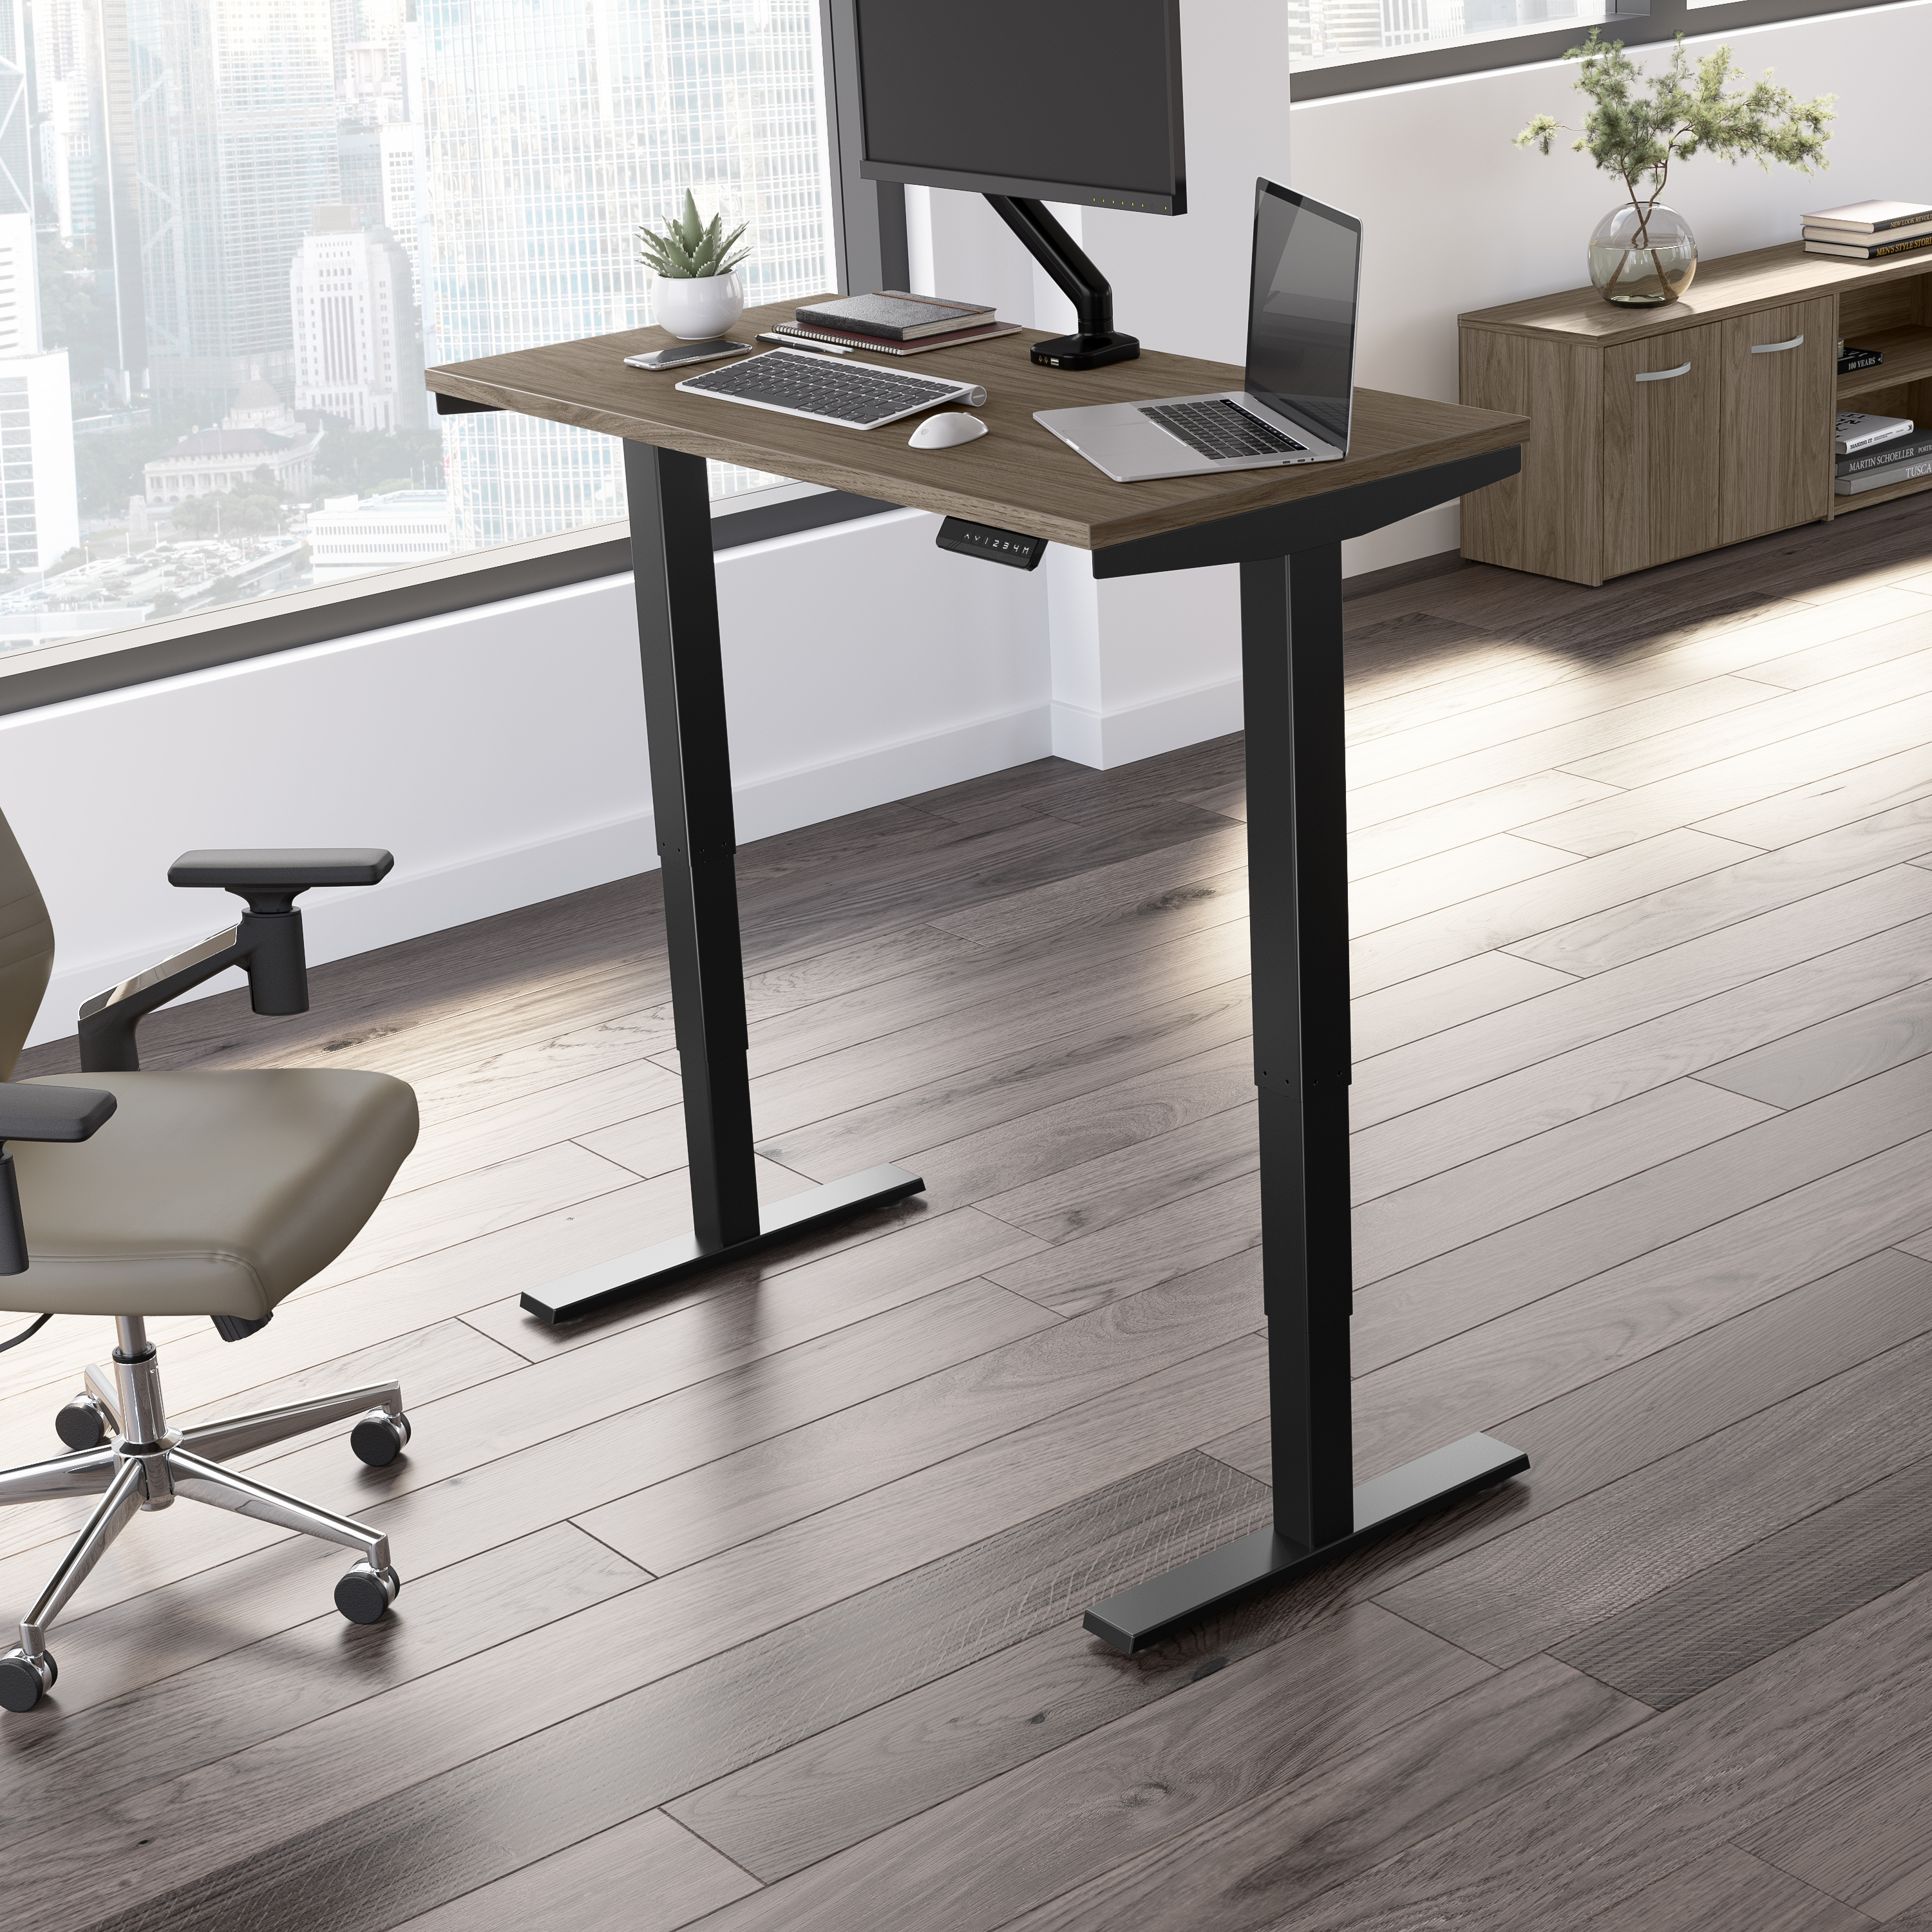 Shop Move 40 Series by Bush Business Furniture 48W x 24D Electric Height Adjustable Standing Desk 01 M4S4824MHBK #color_modern hickory/black powder coat